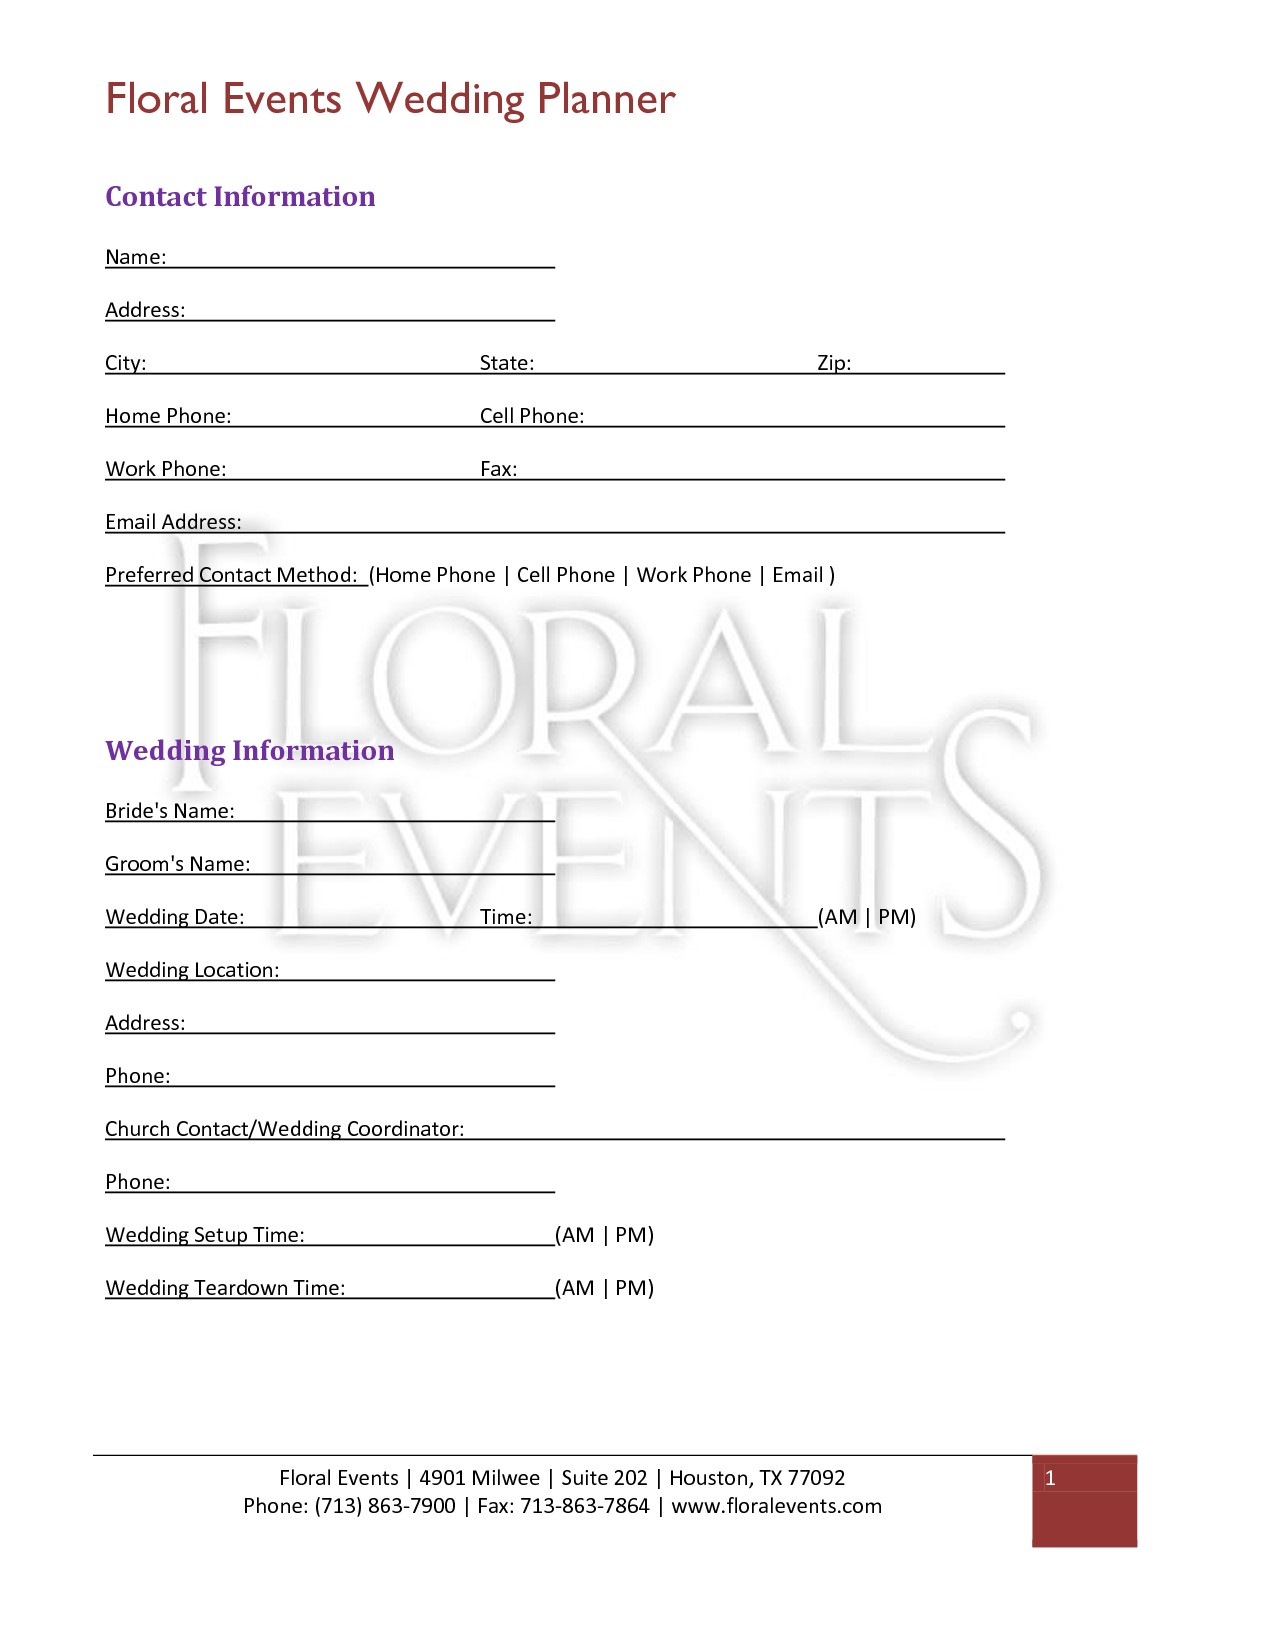 Florist Wedding Contract For Posies Poms In 2018 Pinterest Document Template